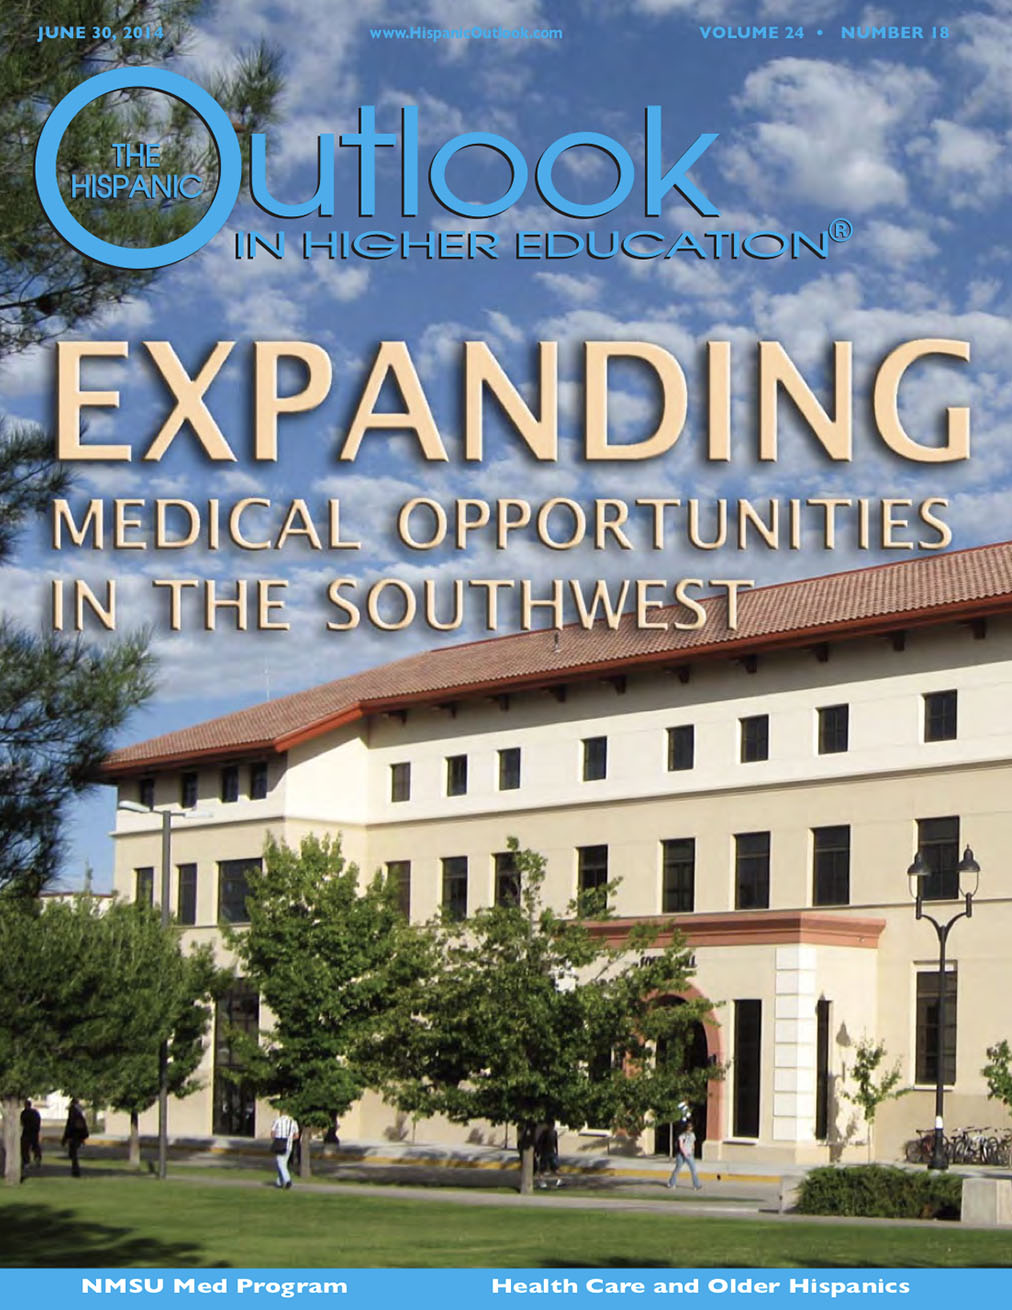 Expanding medical opportunities in the southwest